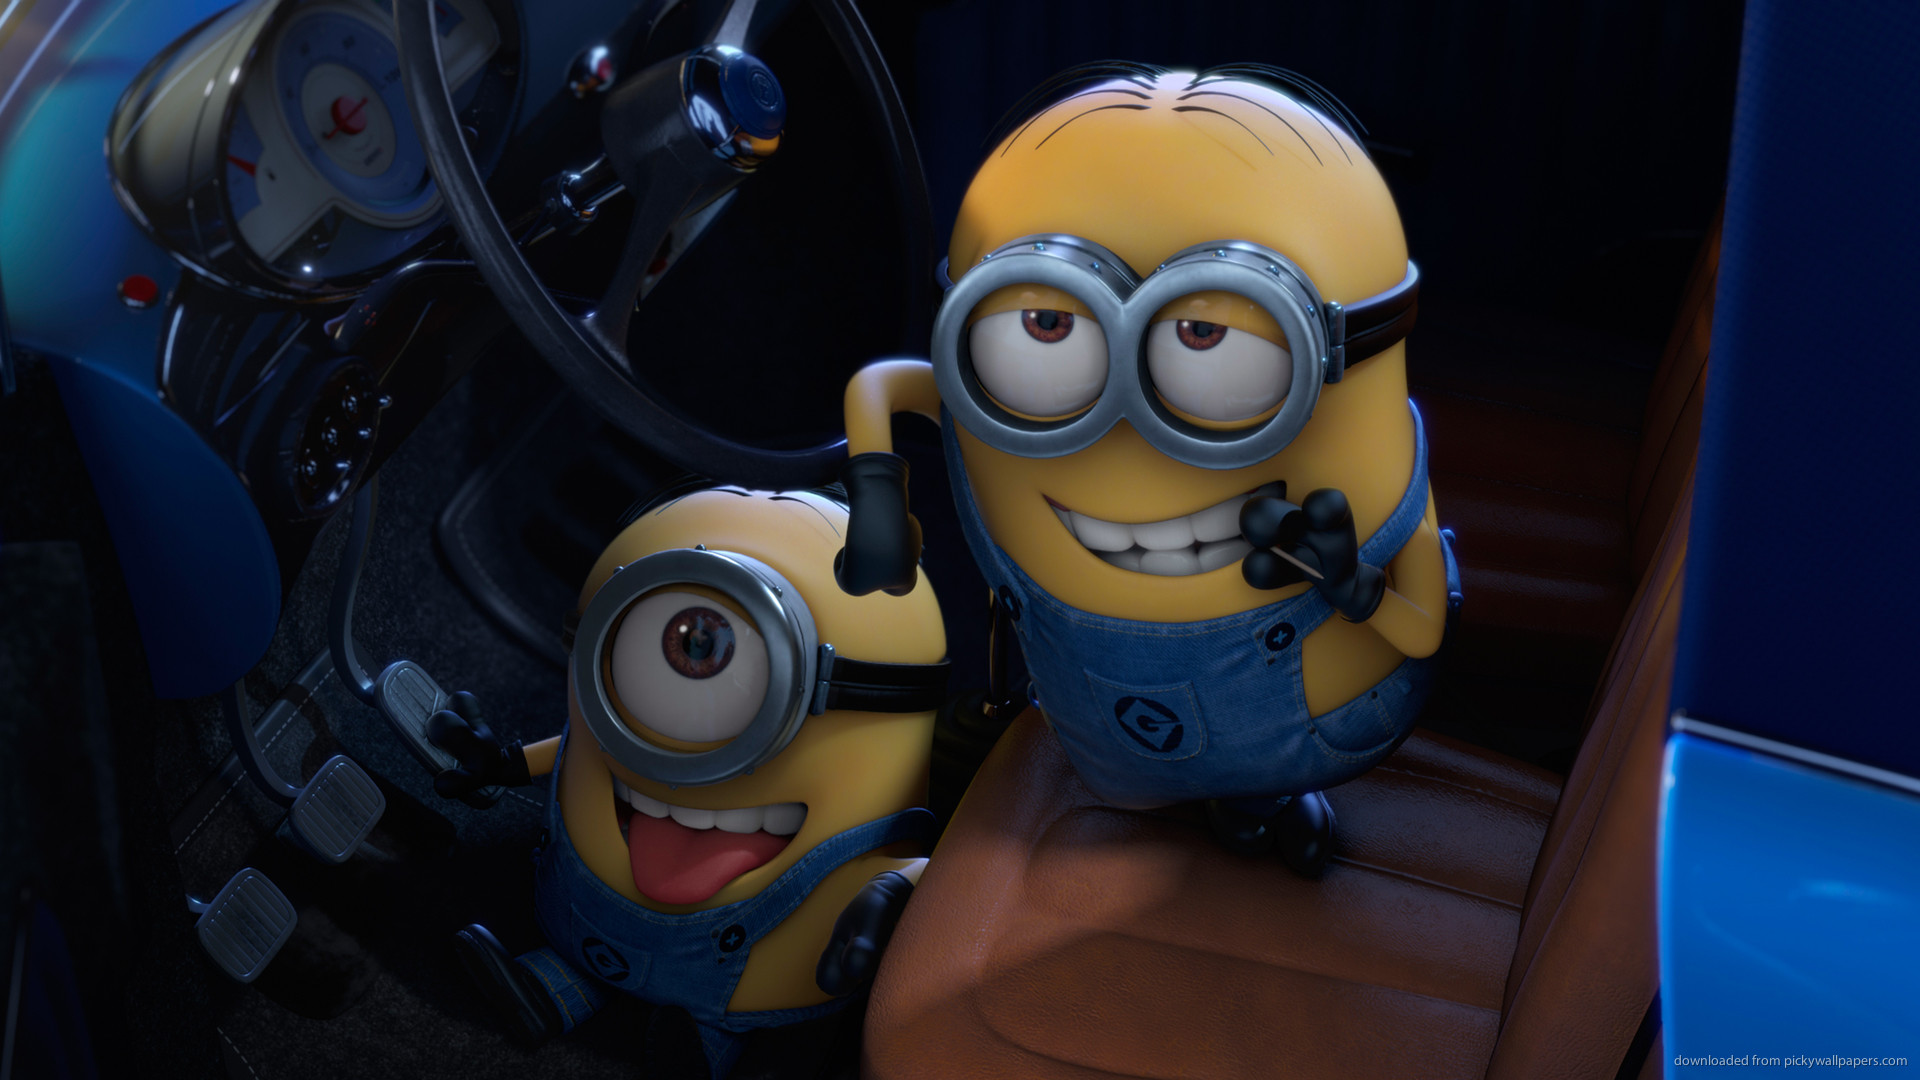 1920x1080 Despicable Me 2 Minions In A Car for 